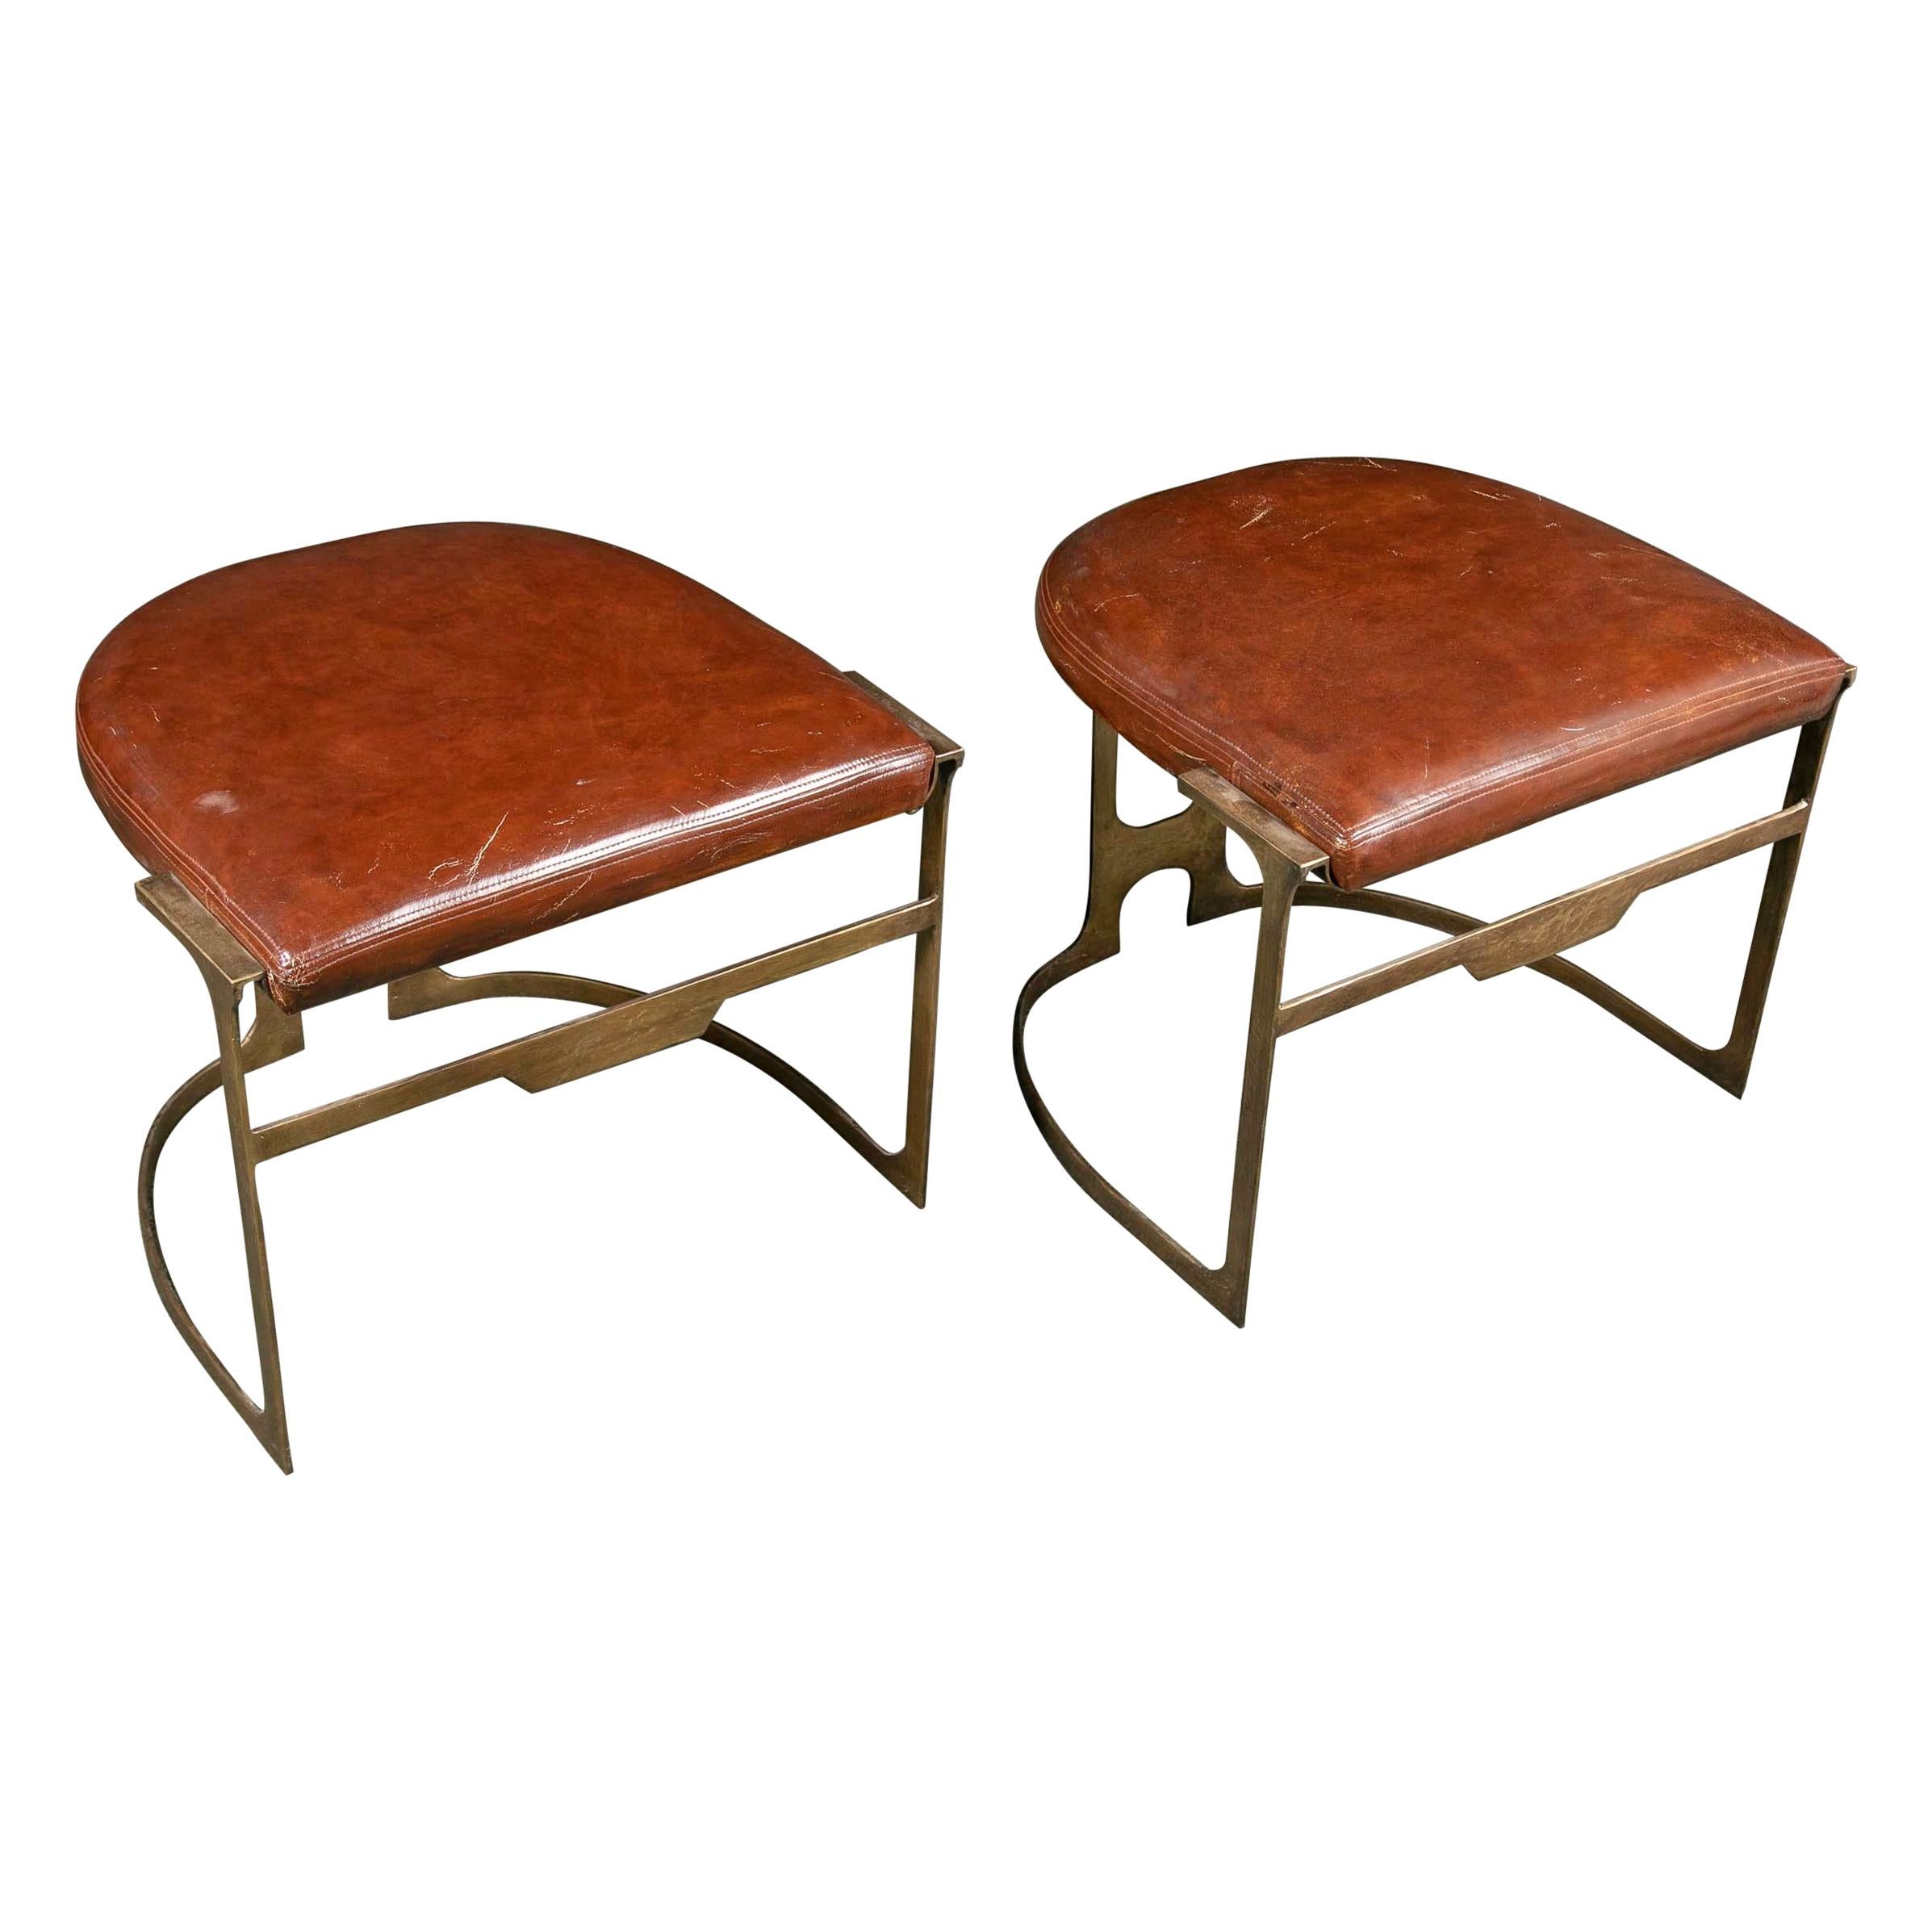 Pair of Contemporary Leather and Patinated Bronze Stools